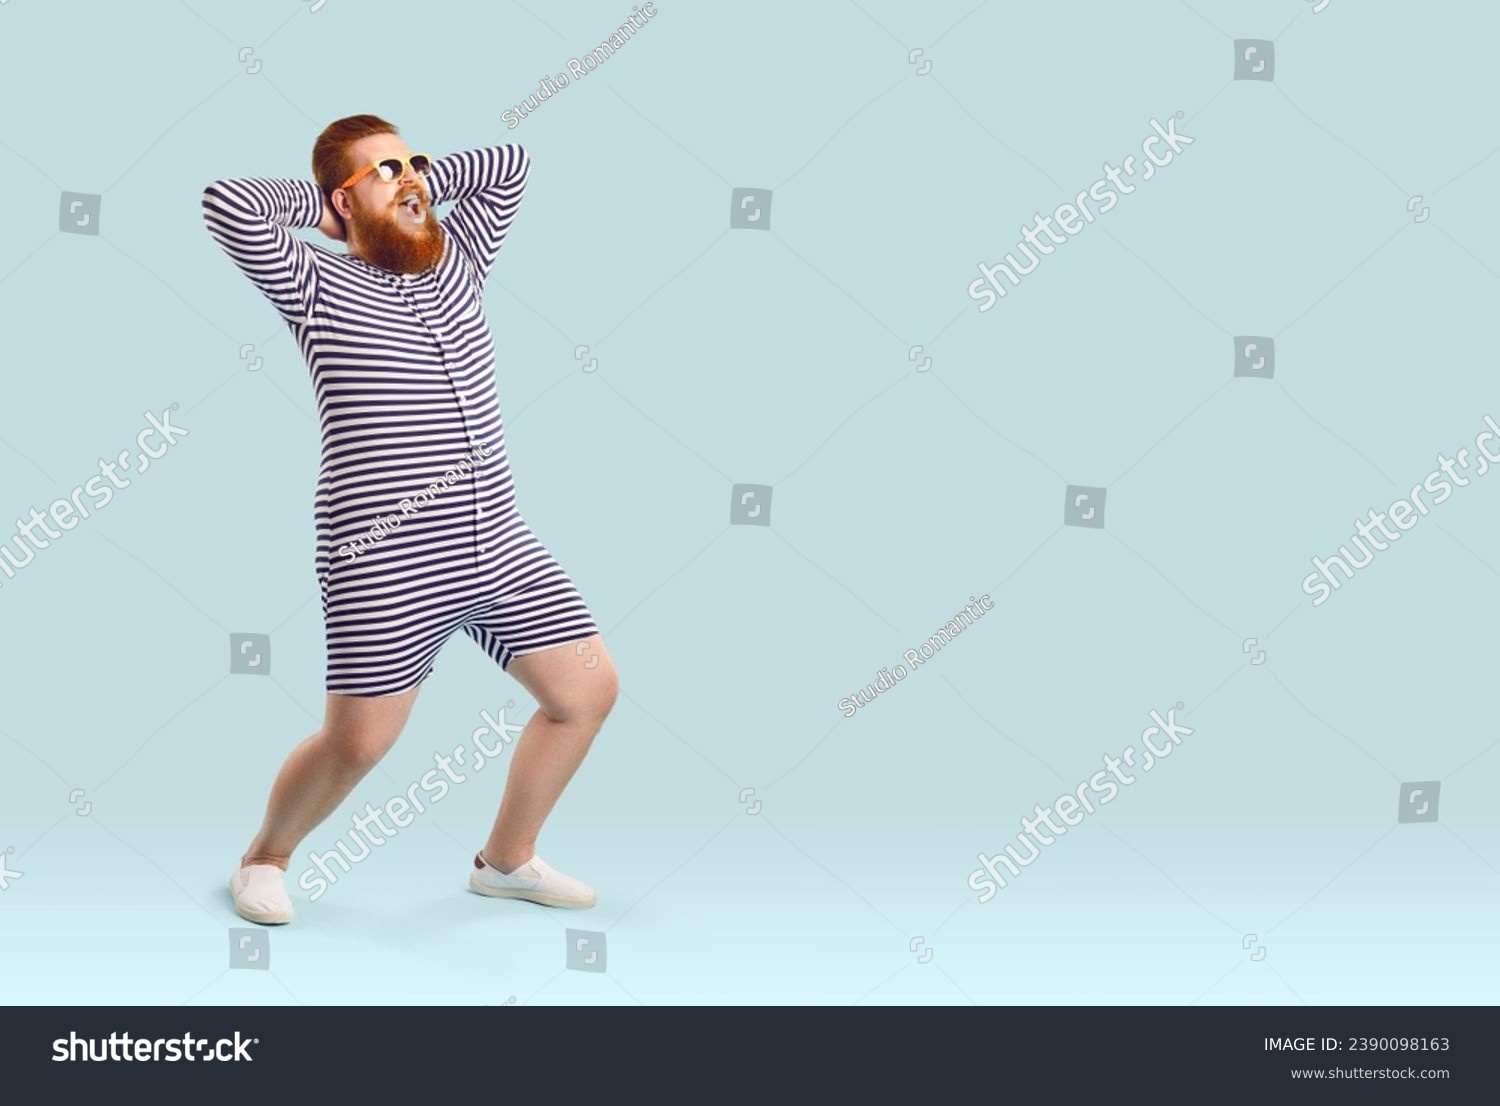 Funny fat man in swimwear having fun on the beach during summer holiday. Happy cheerful excited plump young guy wearing striped swimsuit or underwear posing on light blue copy space studio background #2390098163